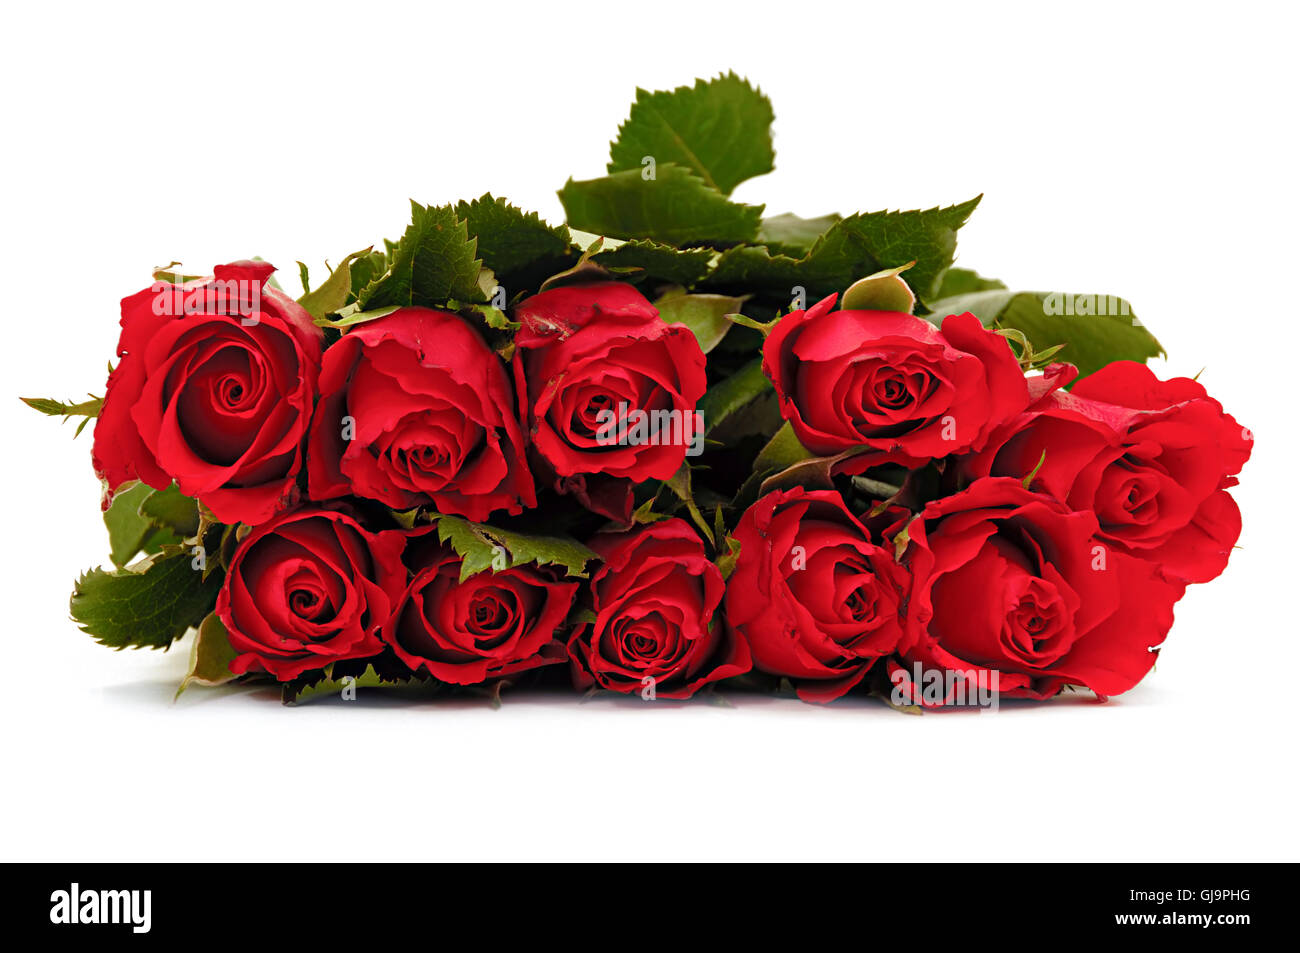 Roses background Cut Out Stock Images & Pictures - Alamy